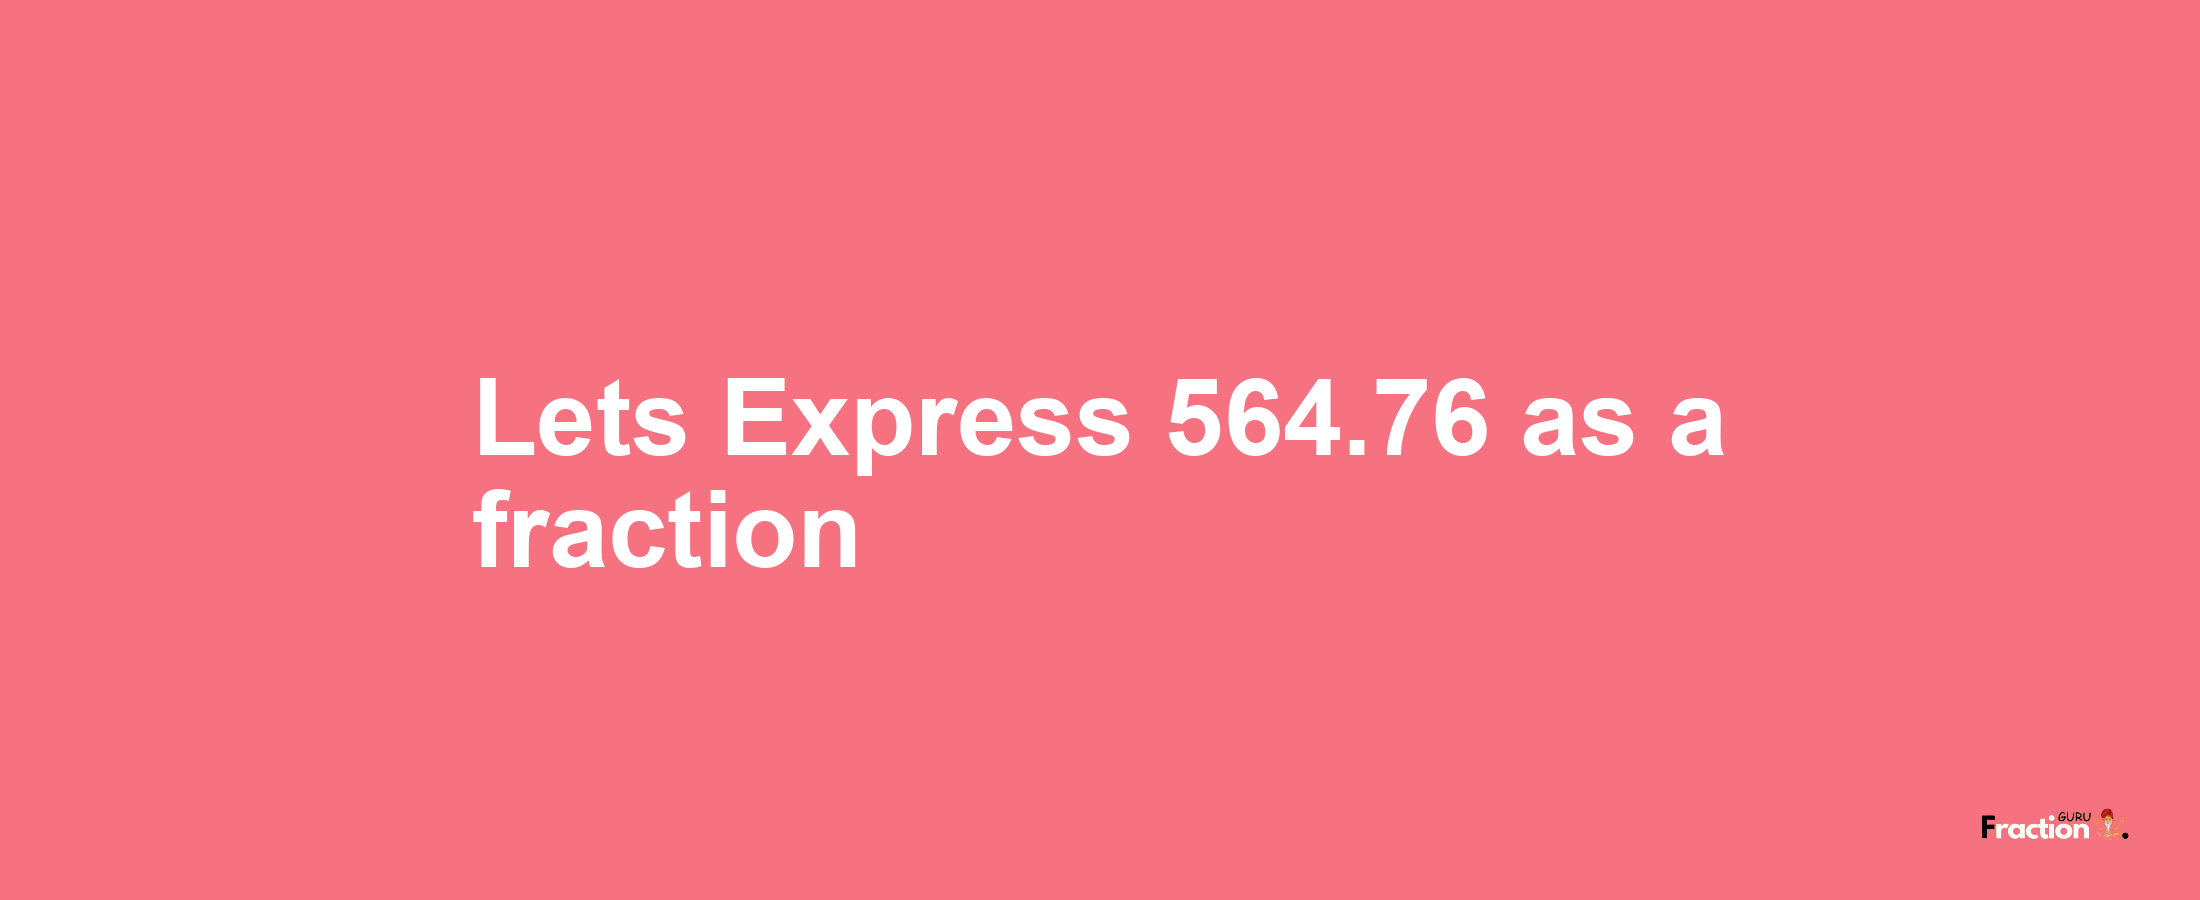 Lets Express 564.76 as afraction